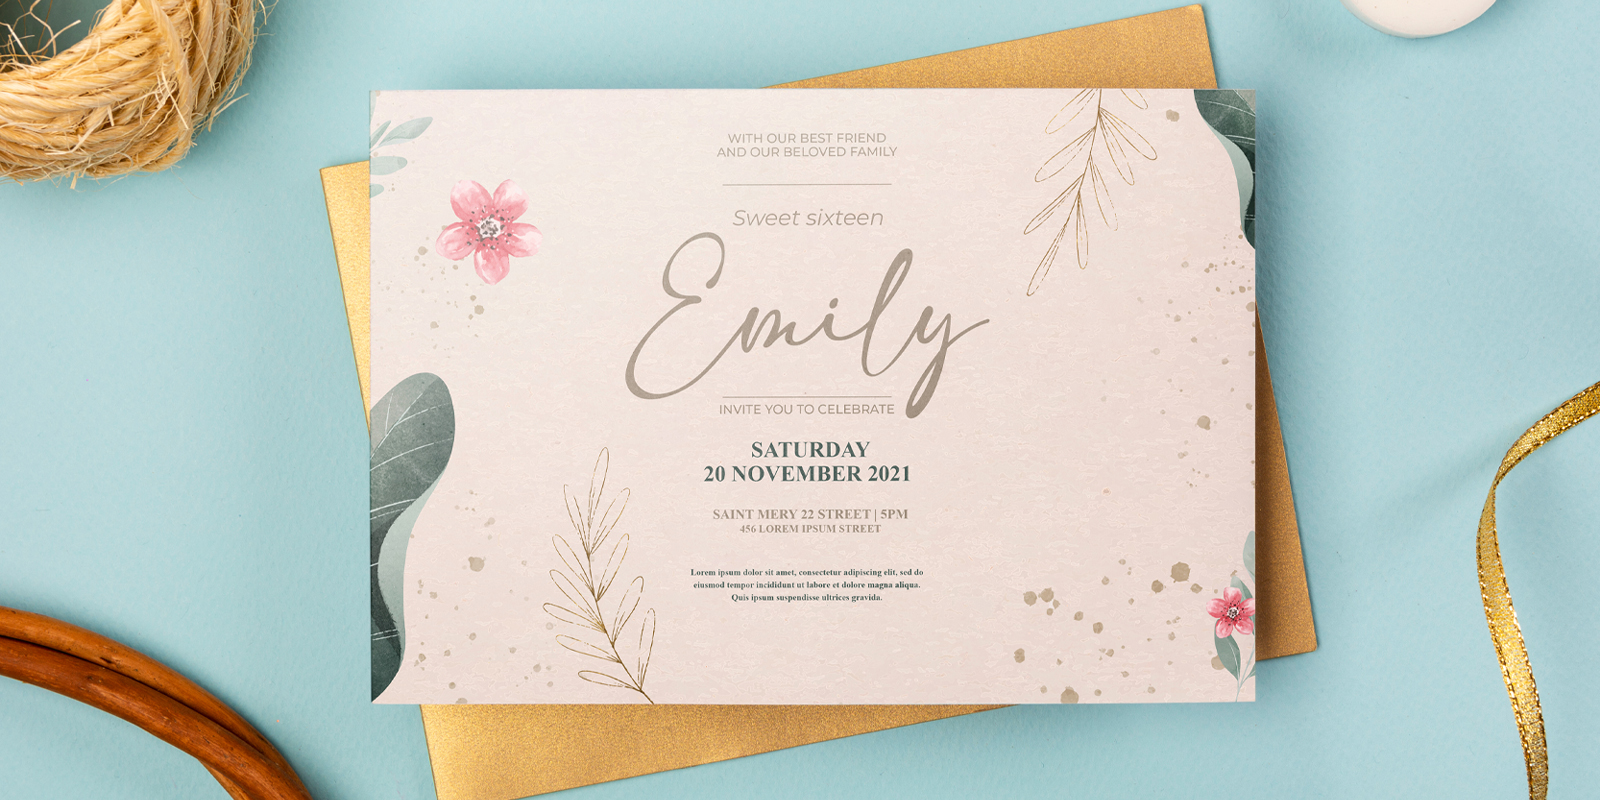 Invitations in Geelong - Print with Pagerr